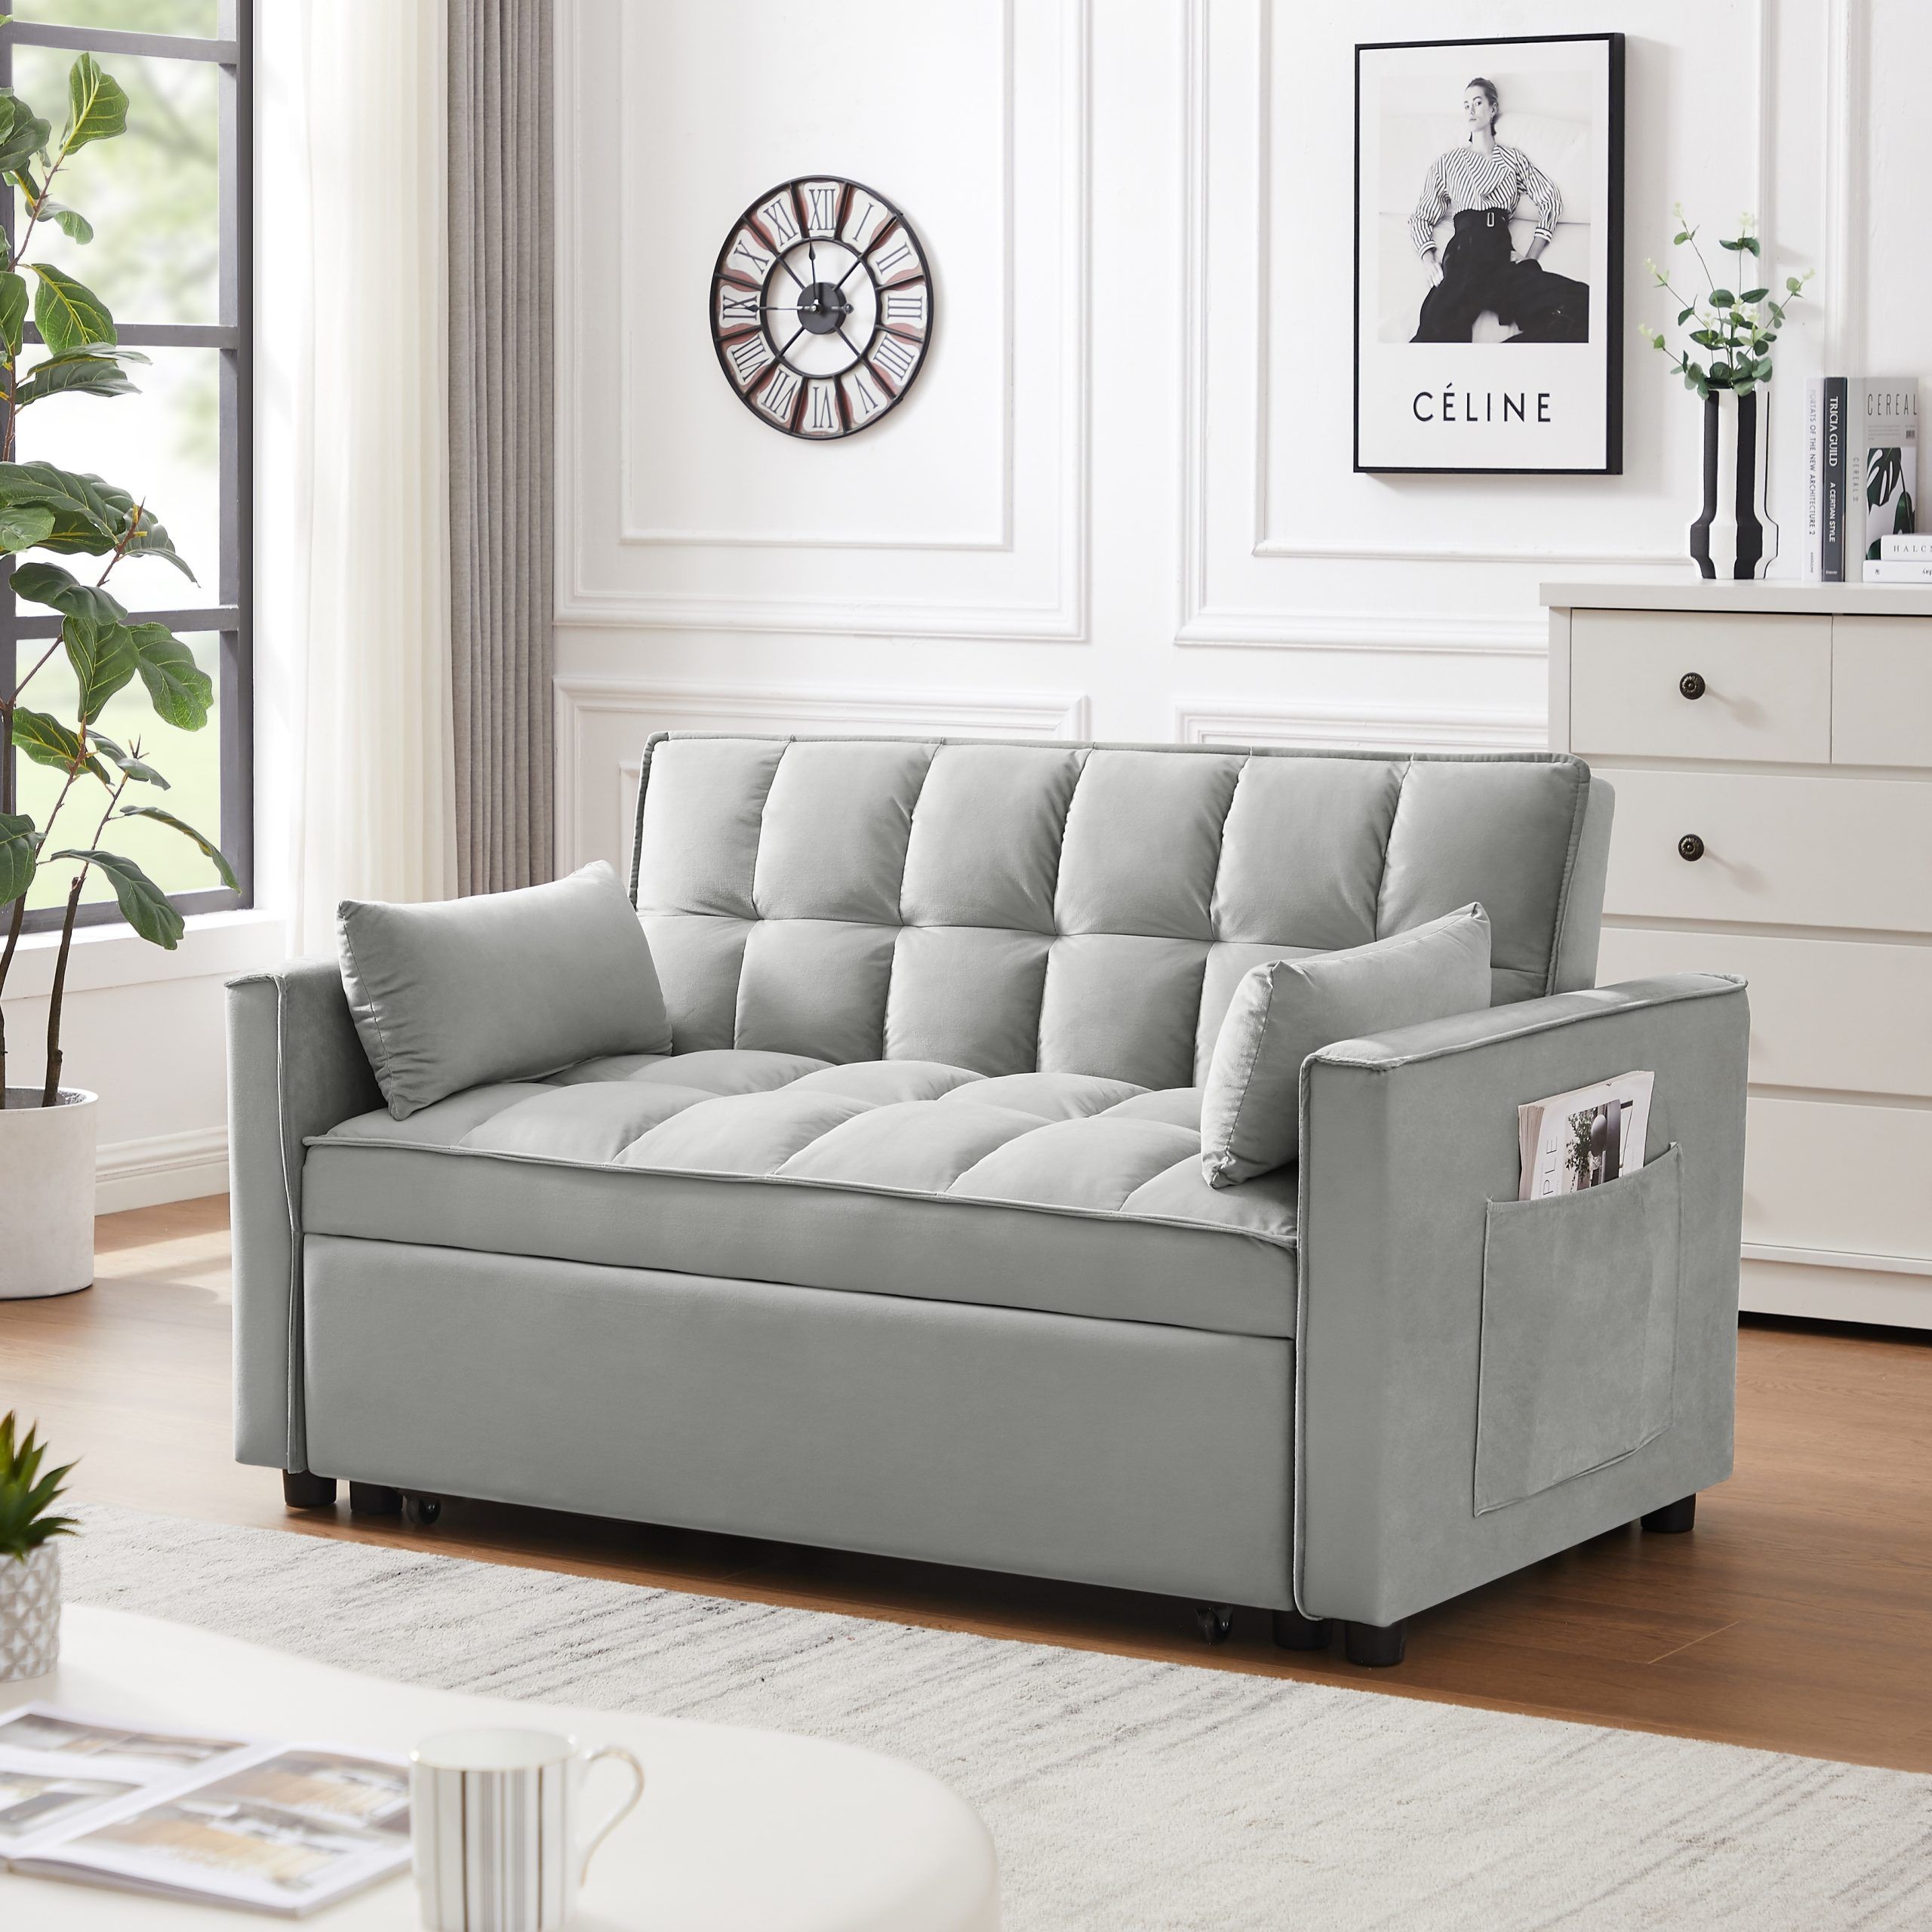 Velvet Loveseat Futon Sofa Pullout Bed, 3 In 1 Convertible Sleeper Sofa Bed  – Bed Bath & Beyond – 38908553 Within 3 In 1 Gray Pull Out Sleeper Sofas (View 5 of 15)